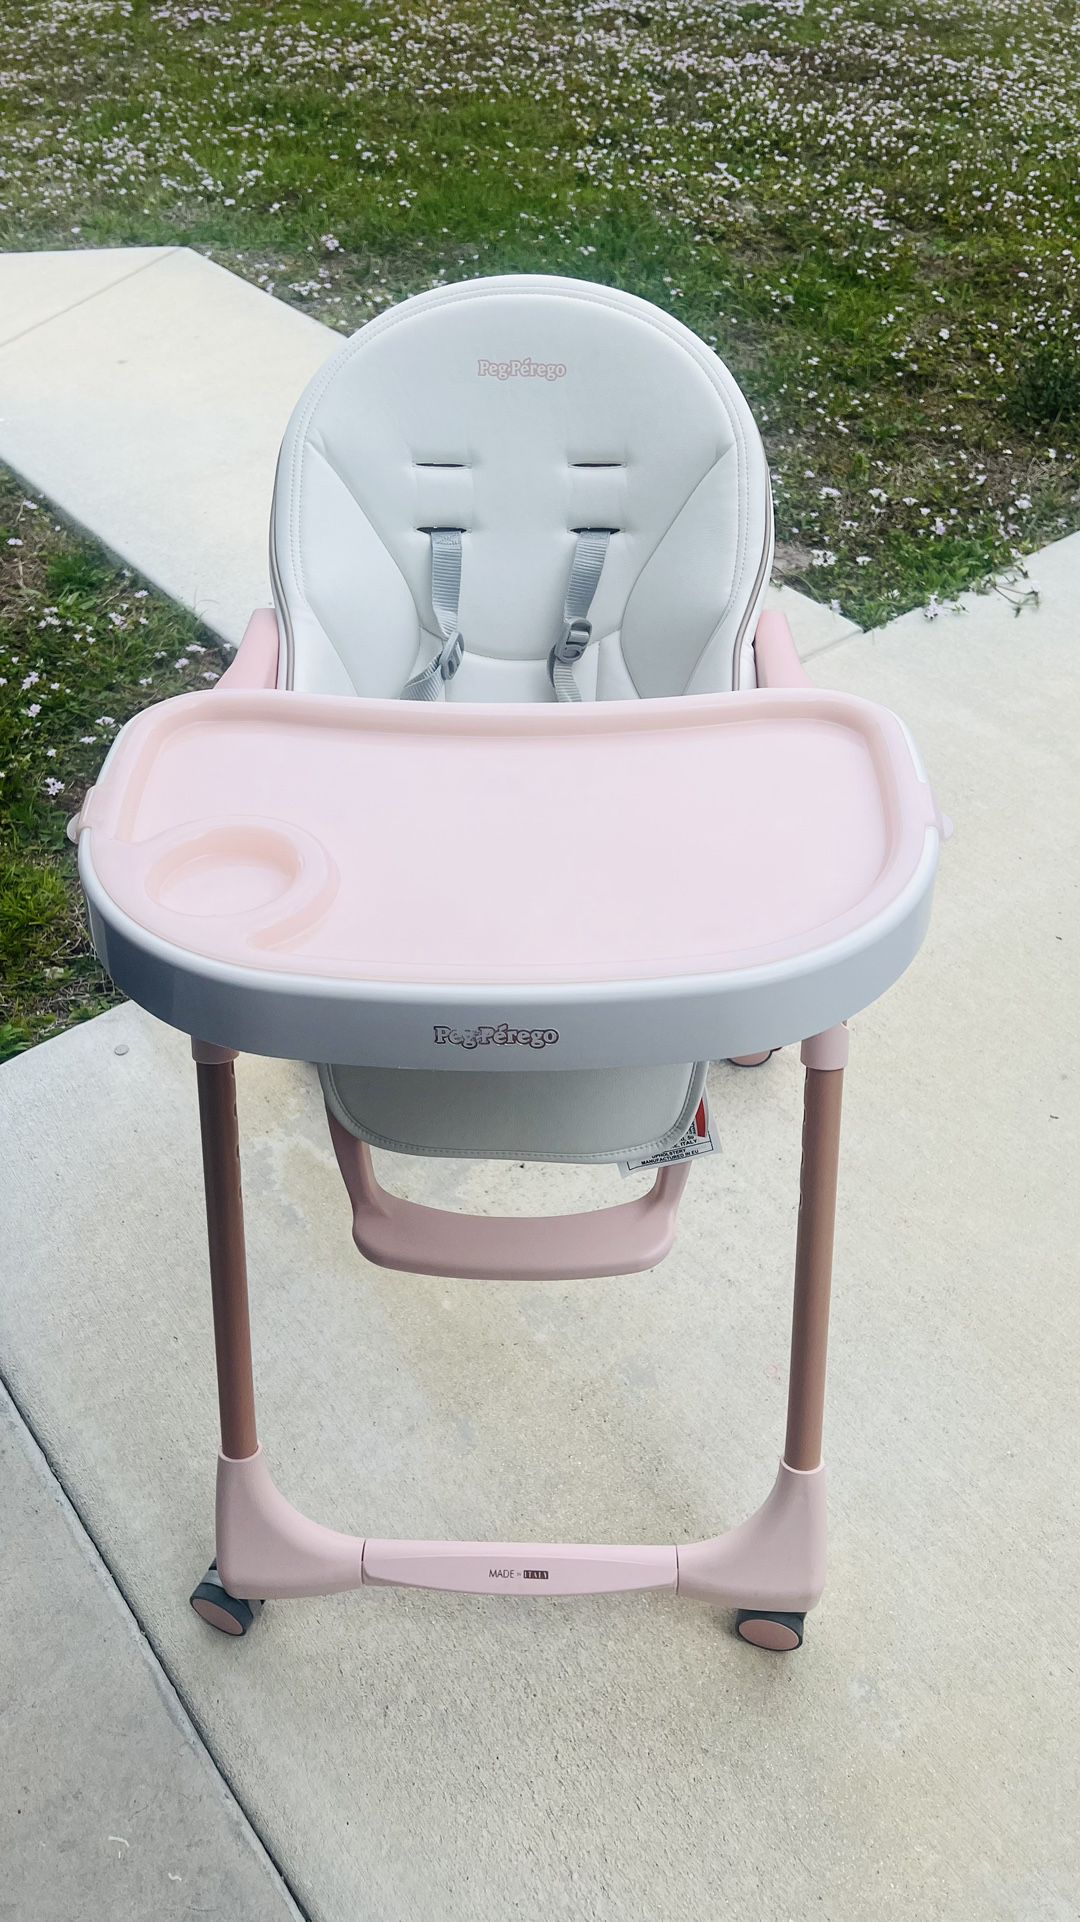 Baby Chair Peg Perego